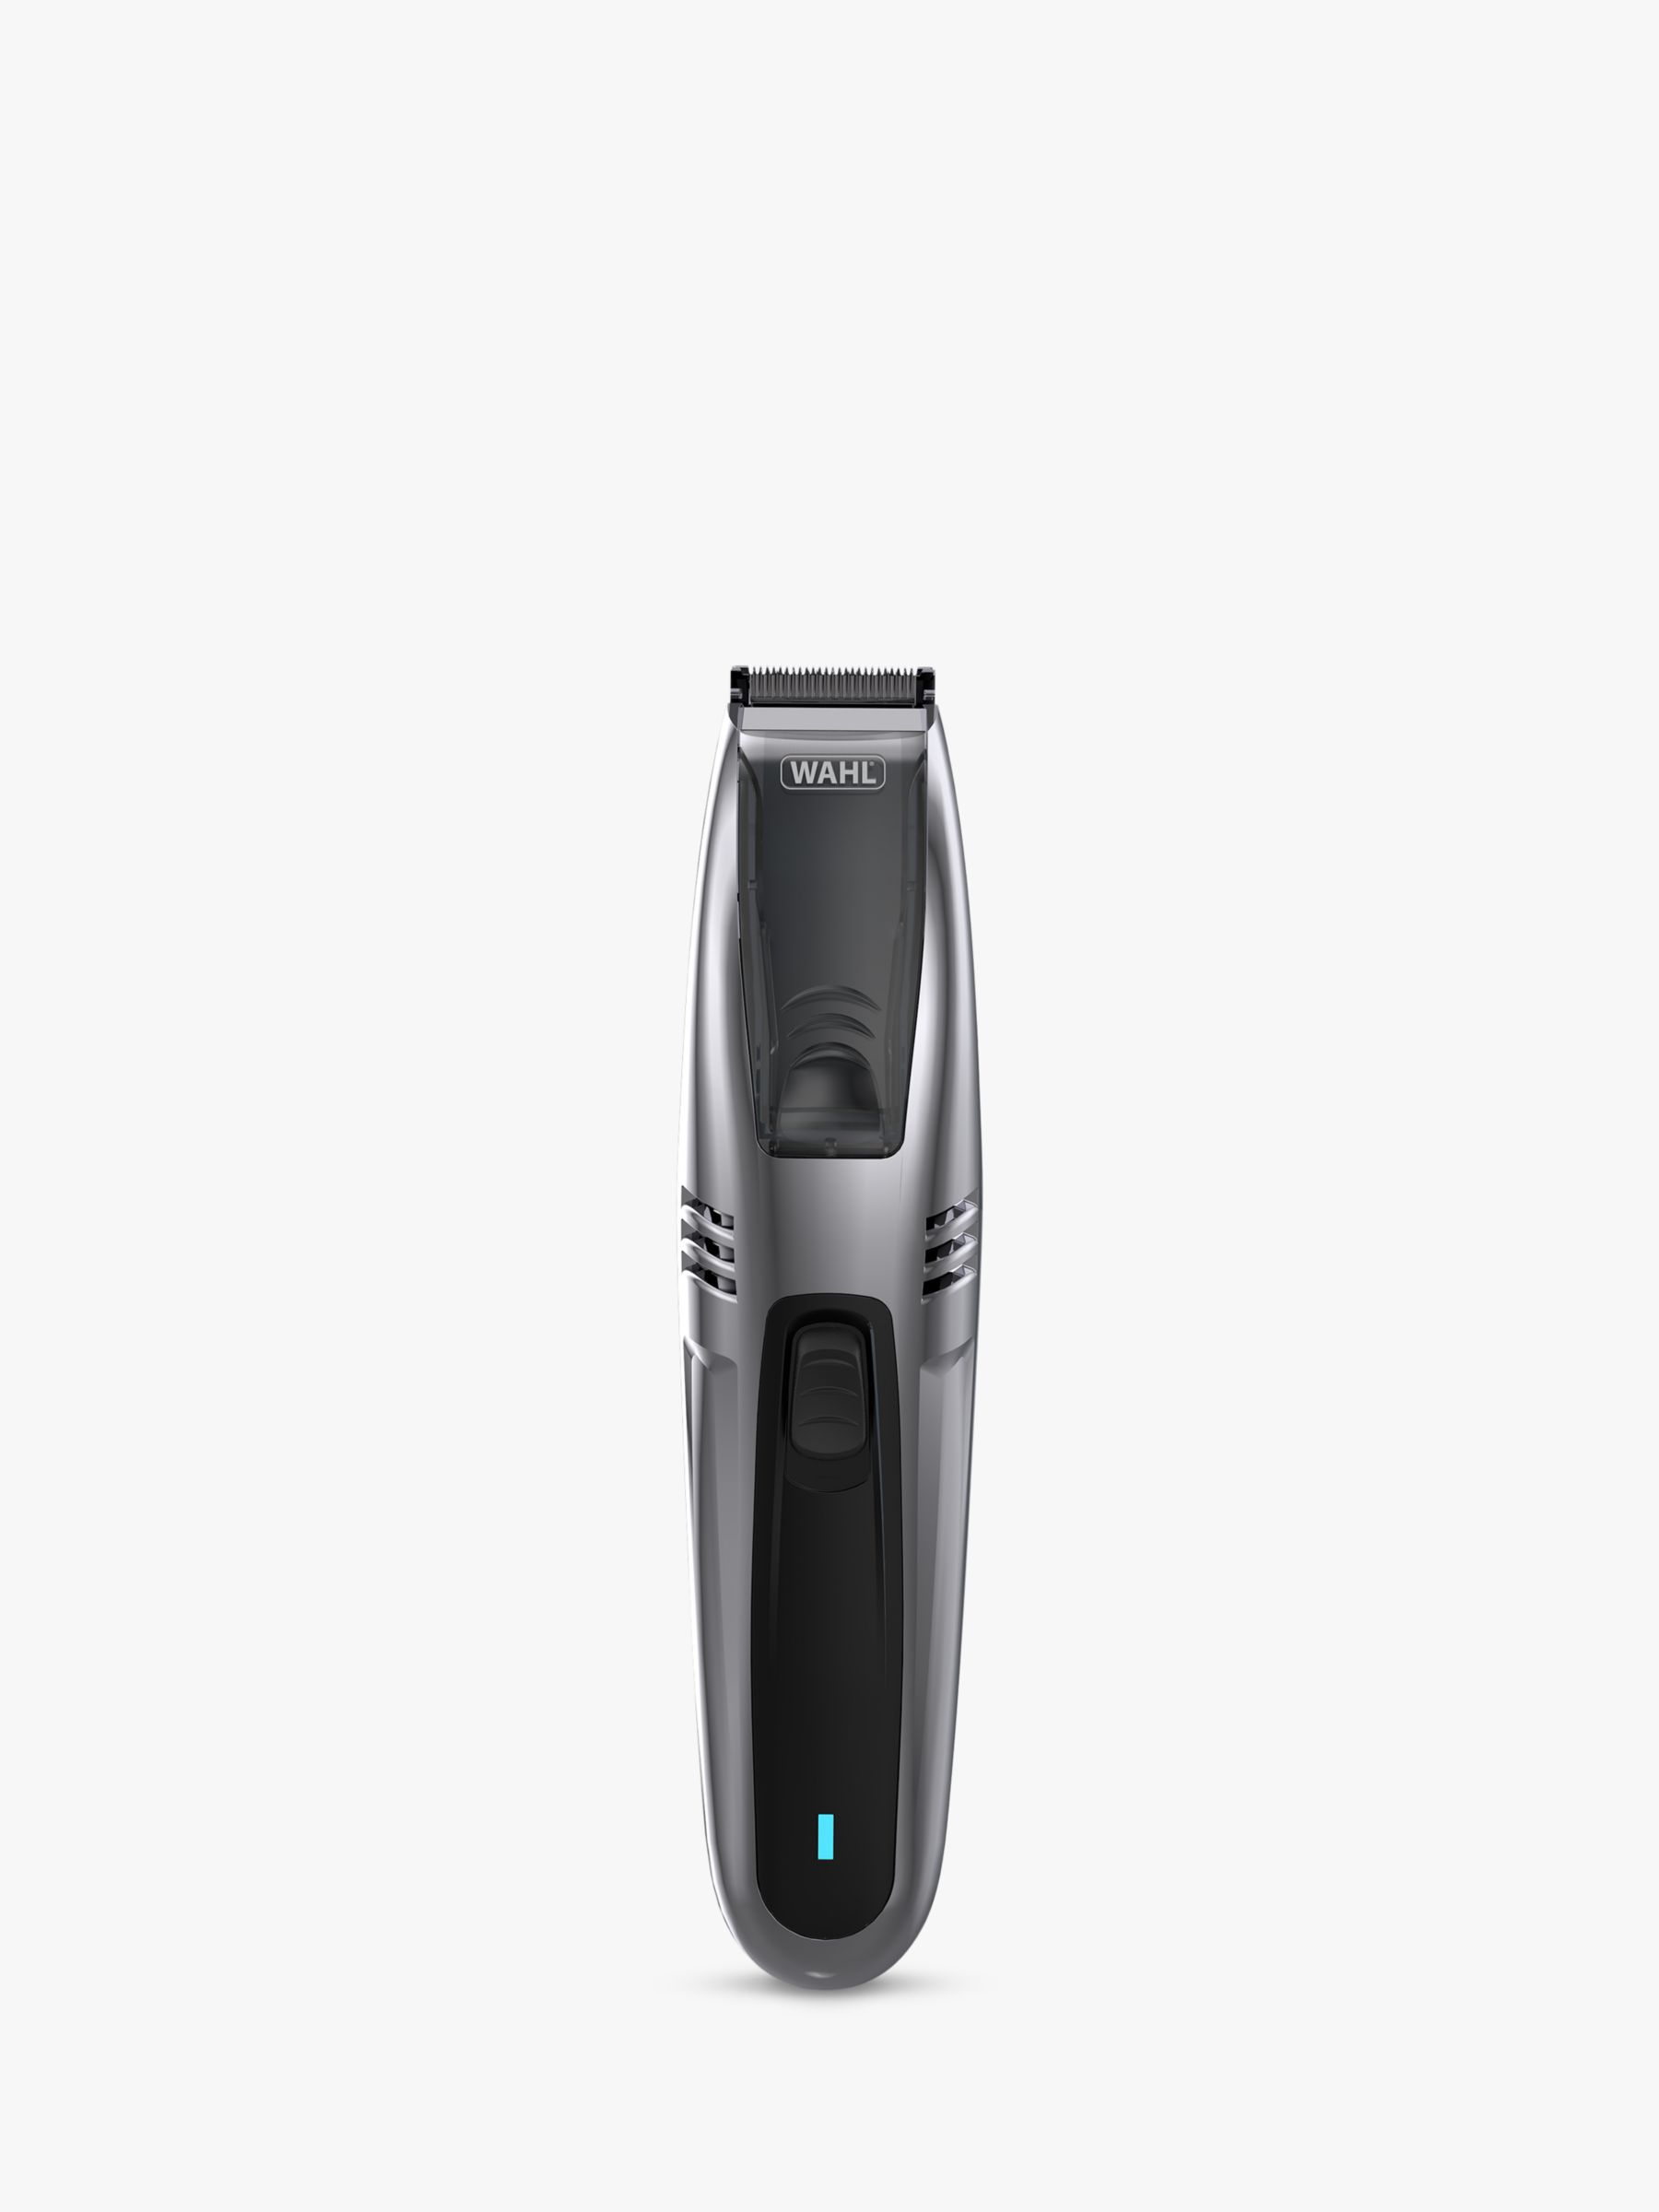 philips norelco nose trimmer 1000